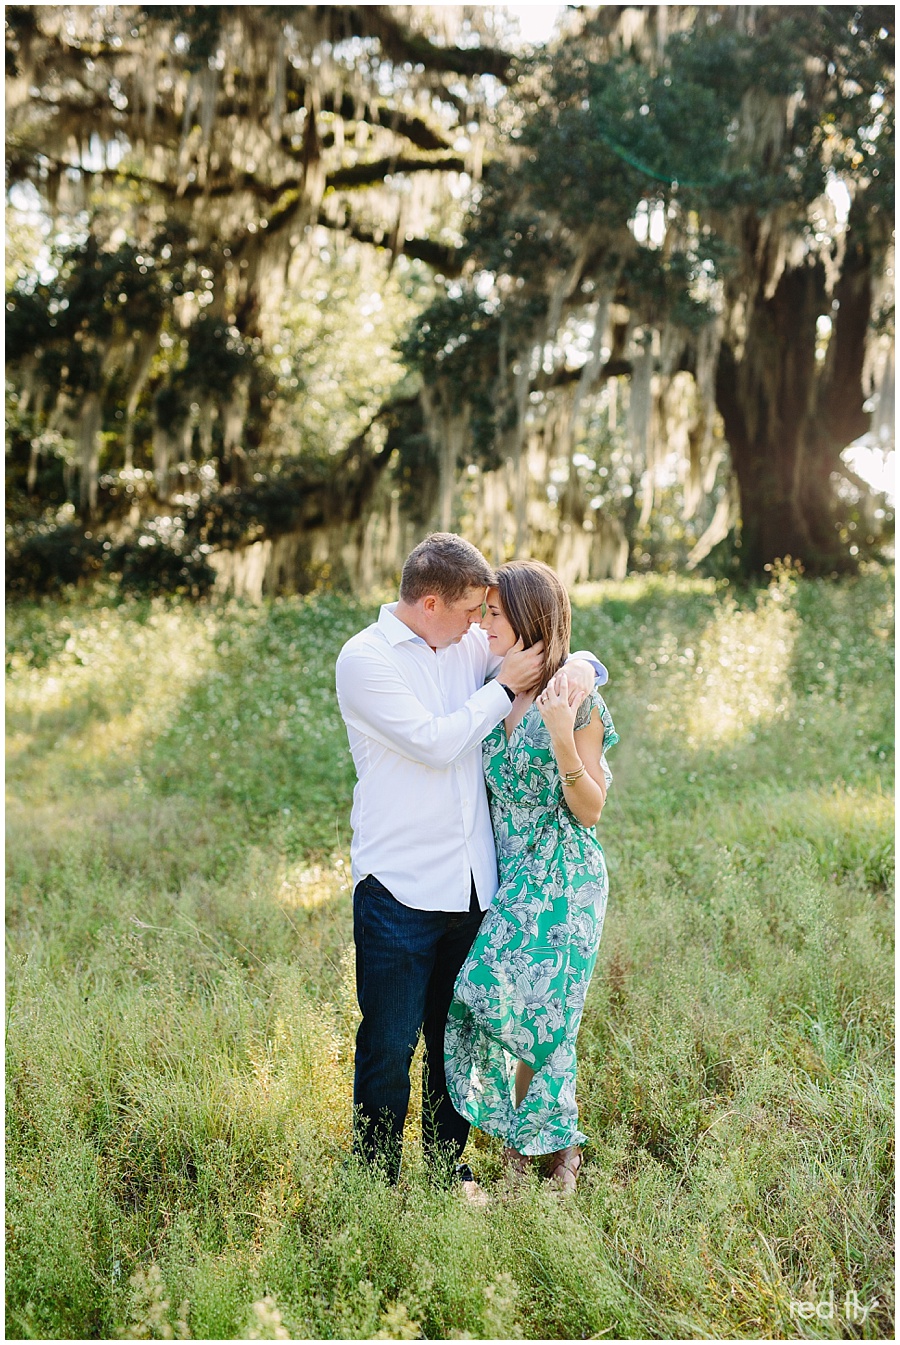 Maclay Gardens Photo Session